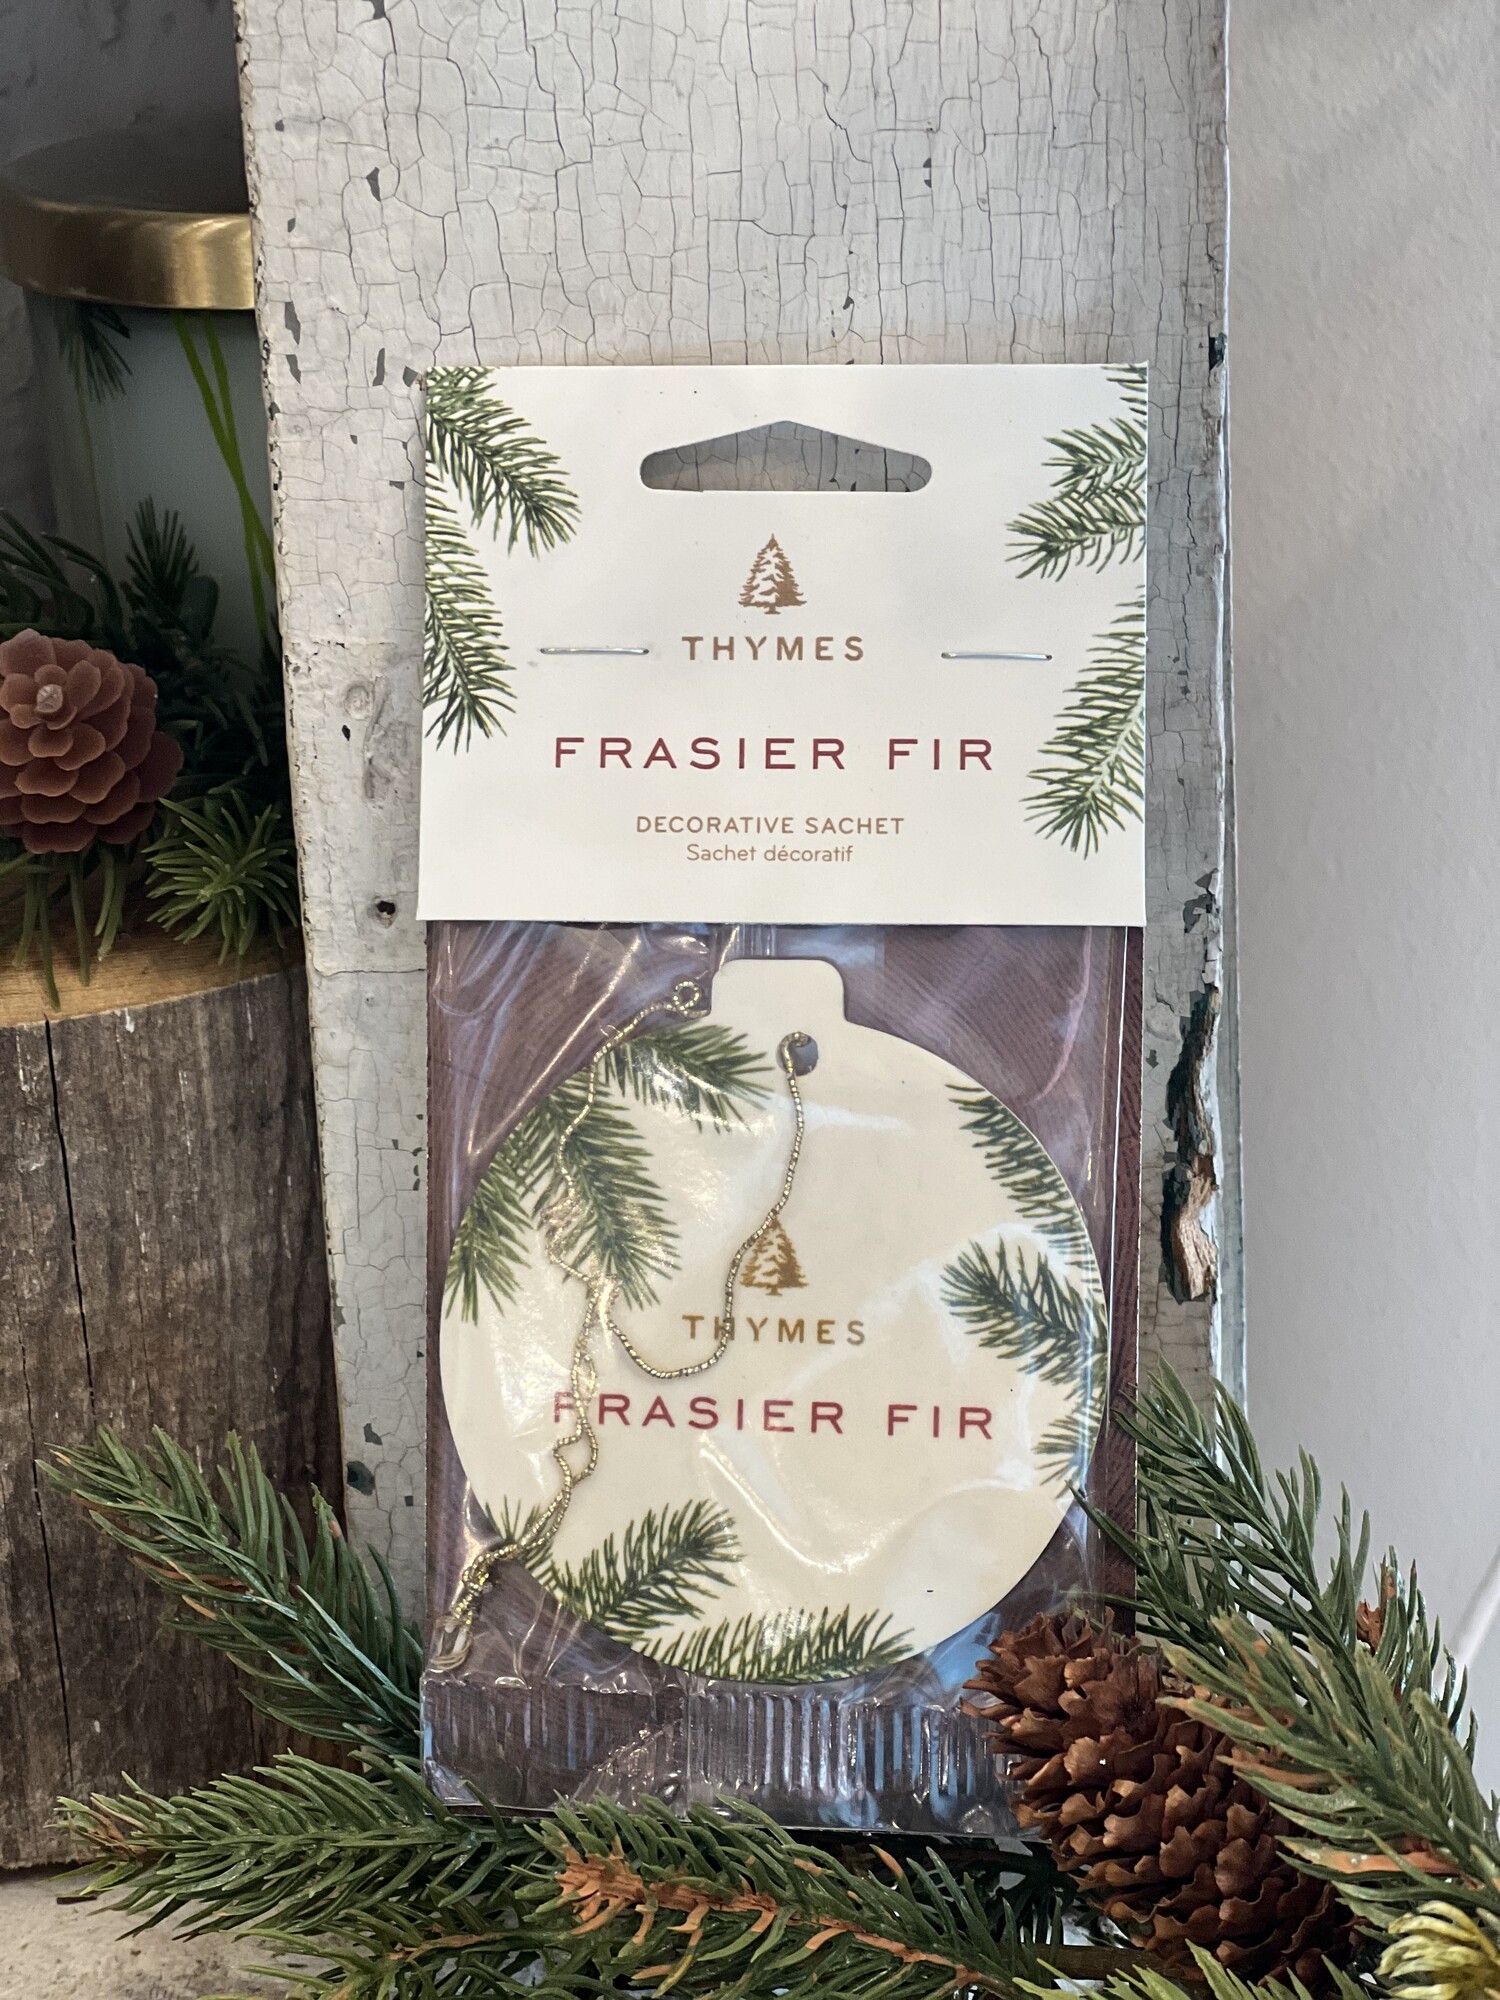 Moutain fresh and glowing with a snap of crisp siberian fir needles, cedarwood and relaxing sandlewood. This highly aromatic sachet has such a beautiful scent that smells like a fresh cut Christmas tree but is great to use year round.